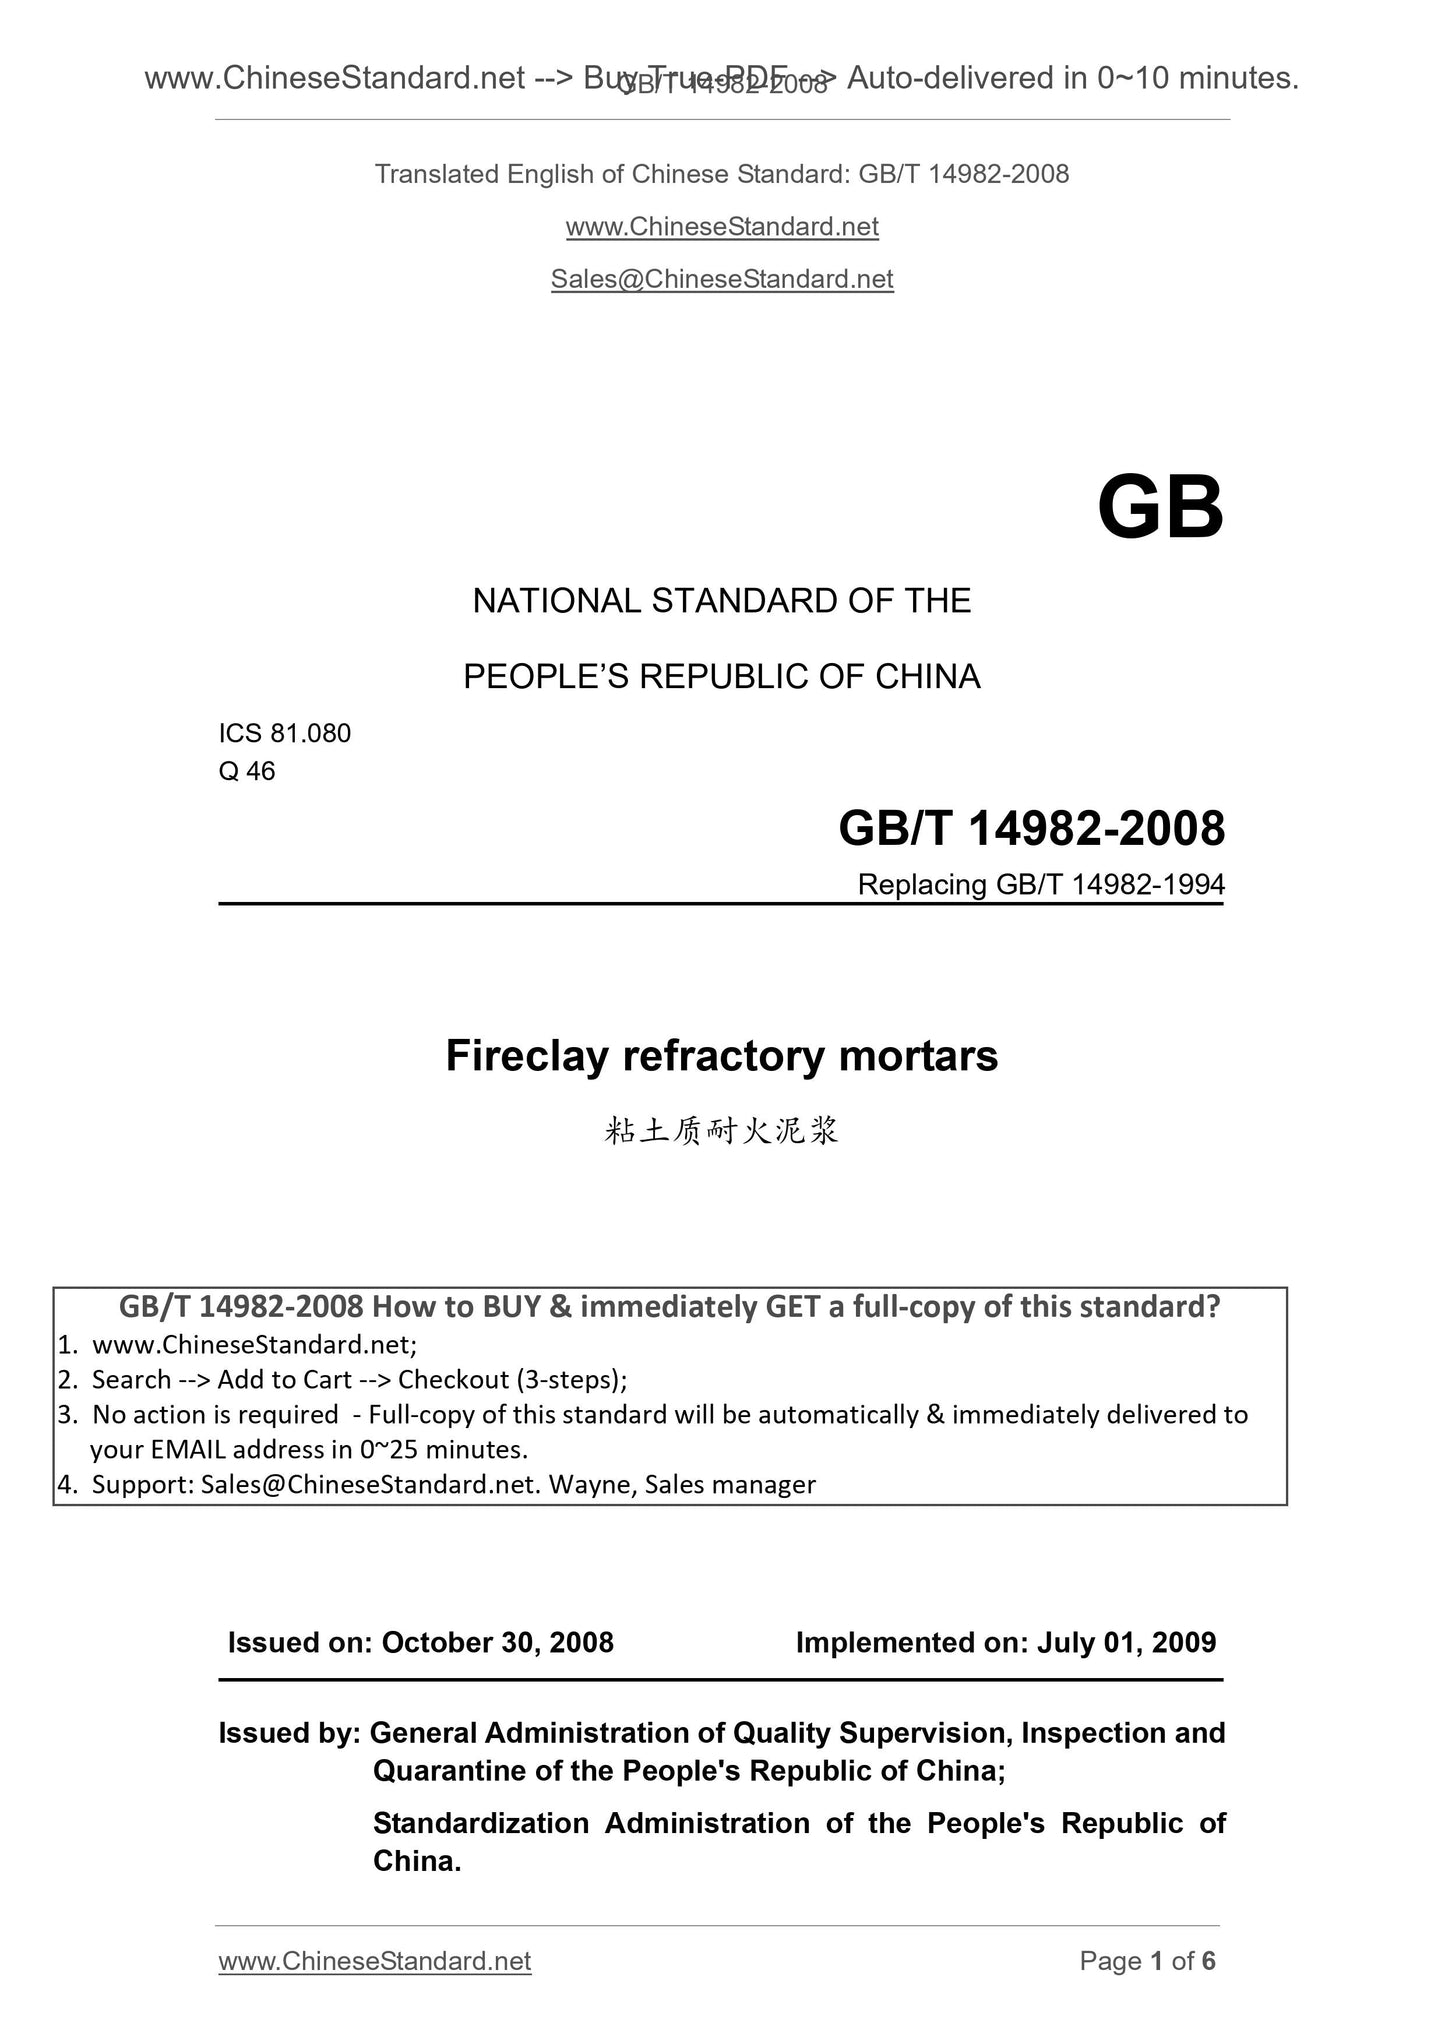 GB/T 14982-2008 Page 1